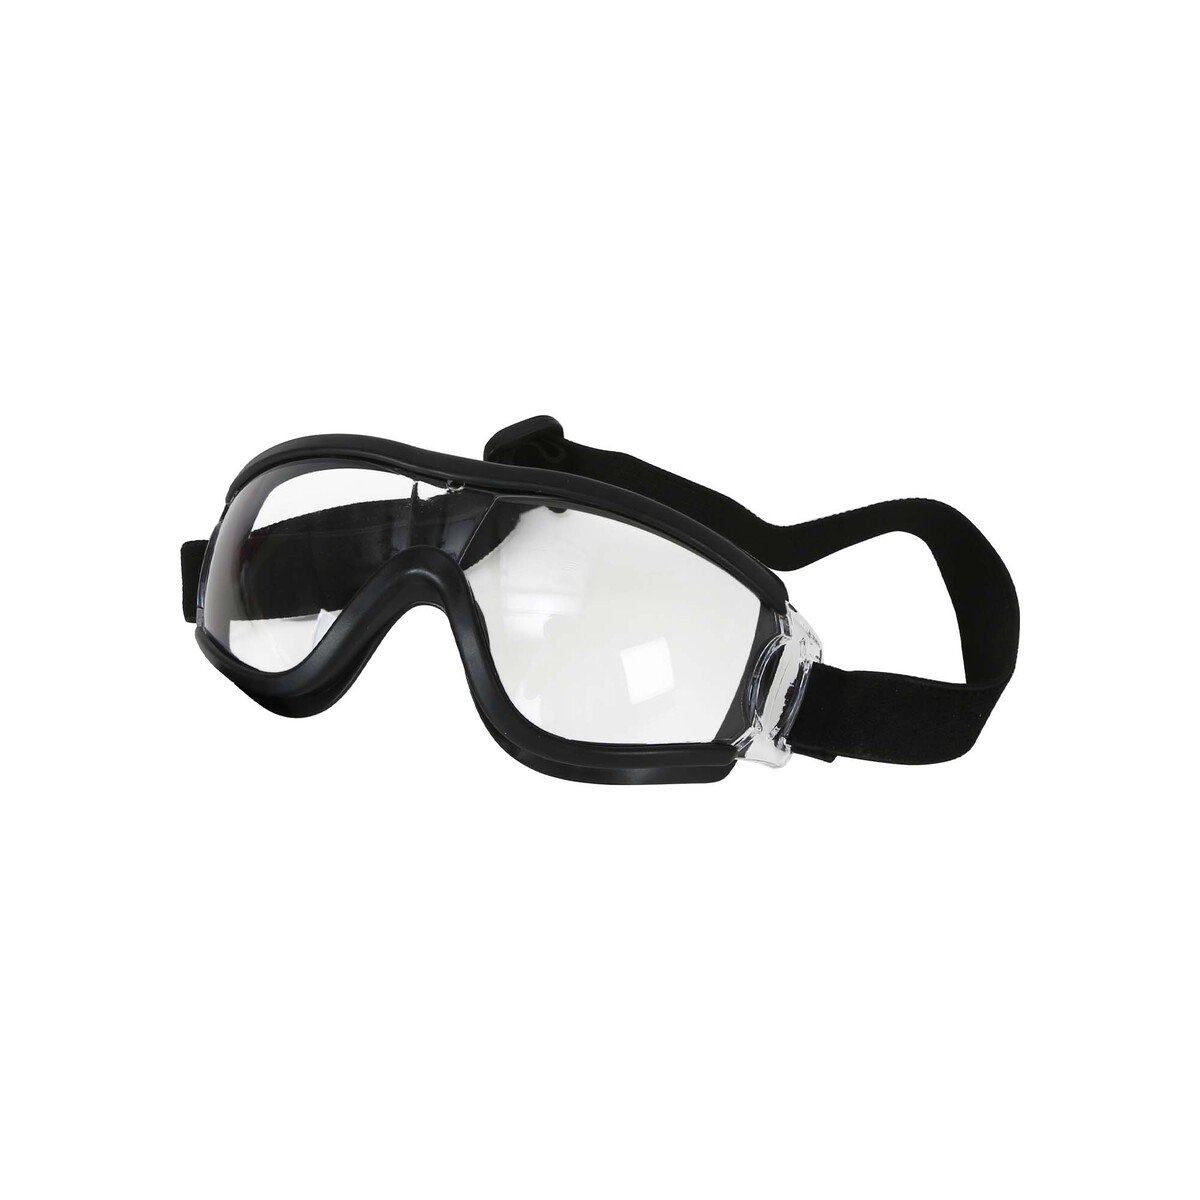 Protect Plus Kids Goggles With Band GG-1